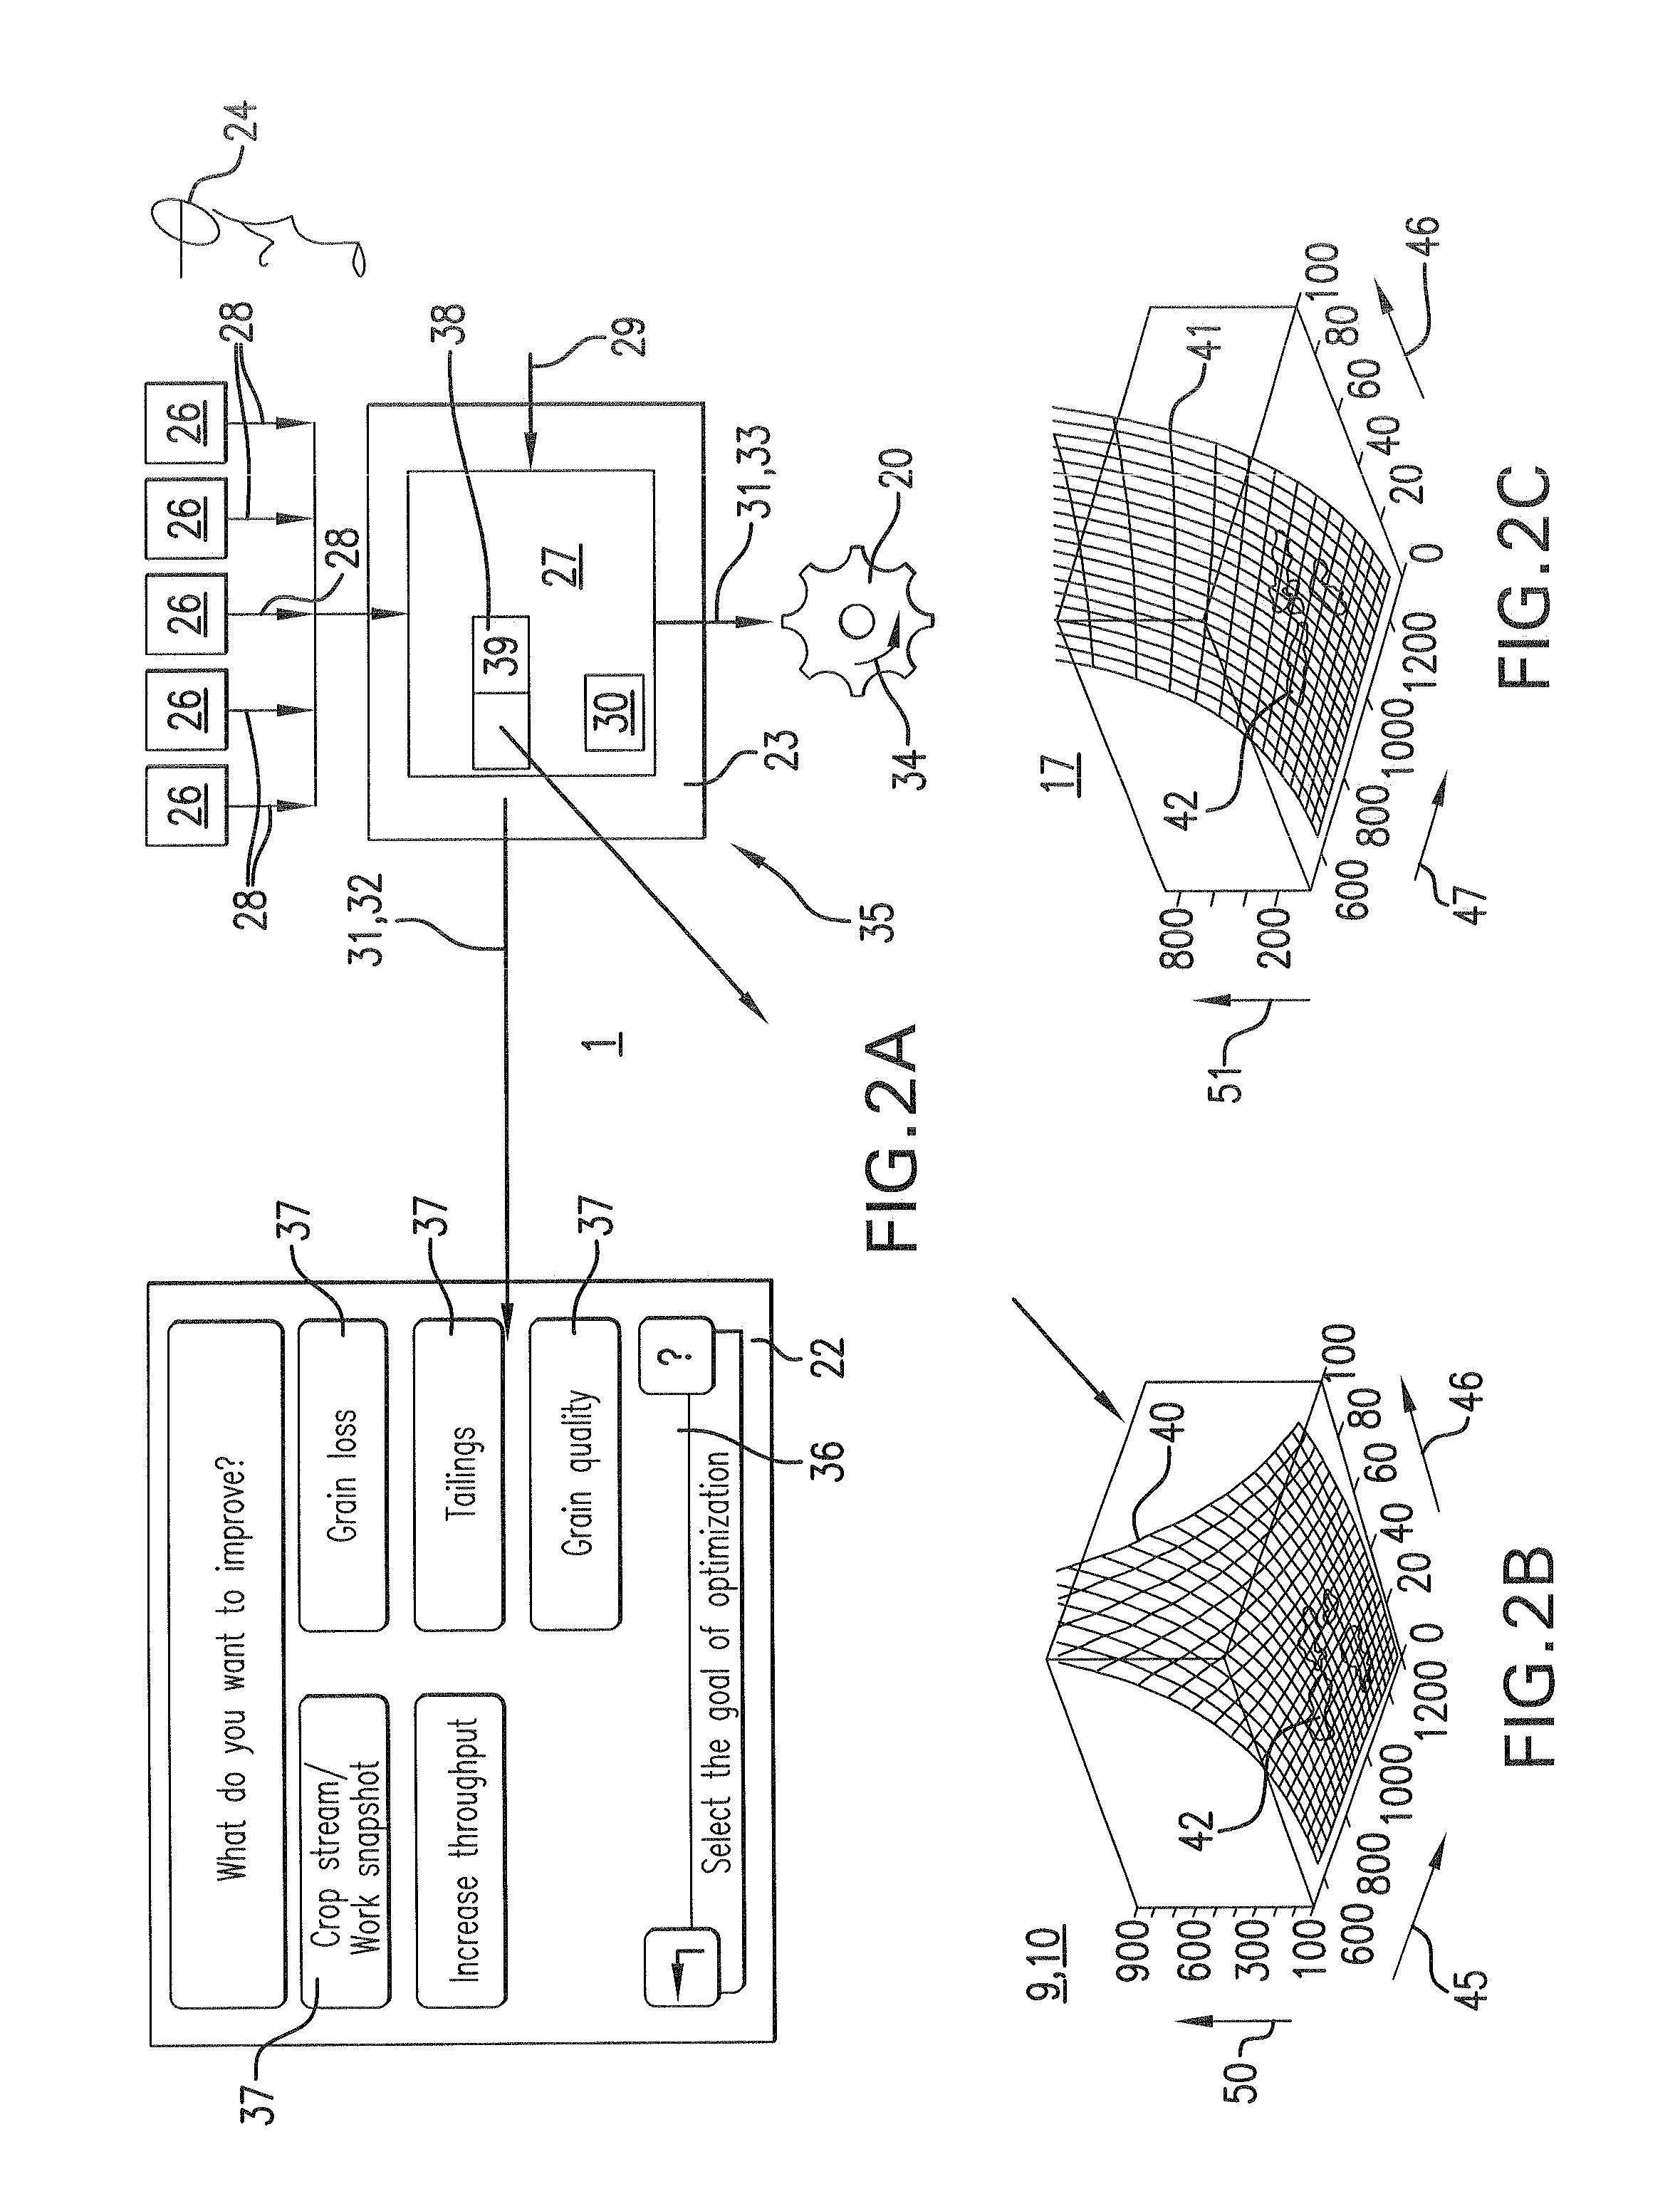 Assistance system for optimizing vehicle operation